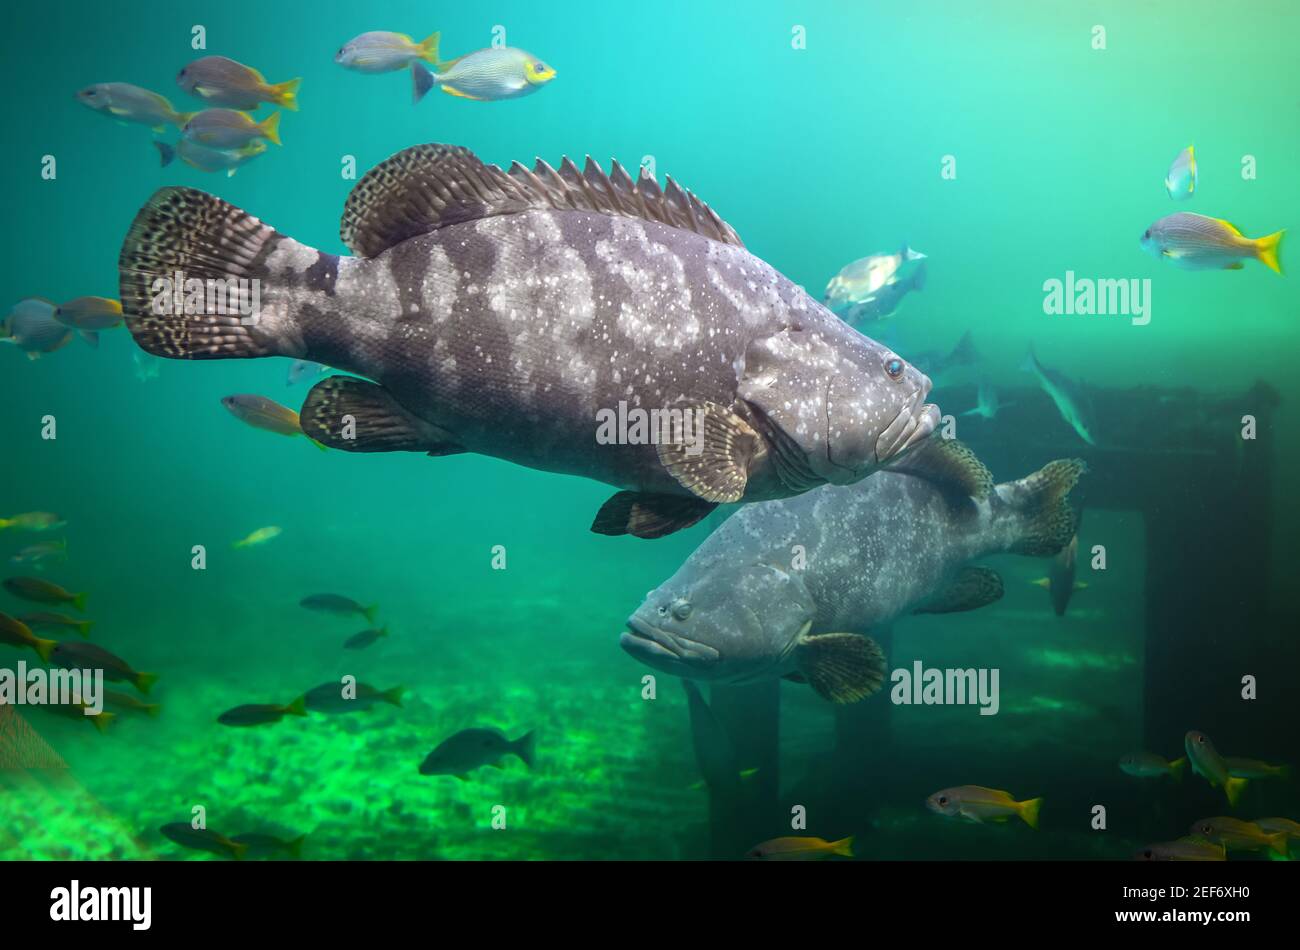 Giant grouper or brown spotted grouper fish swimming under green sea water with sun lighting. Stock Photo